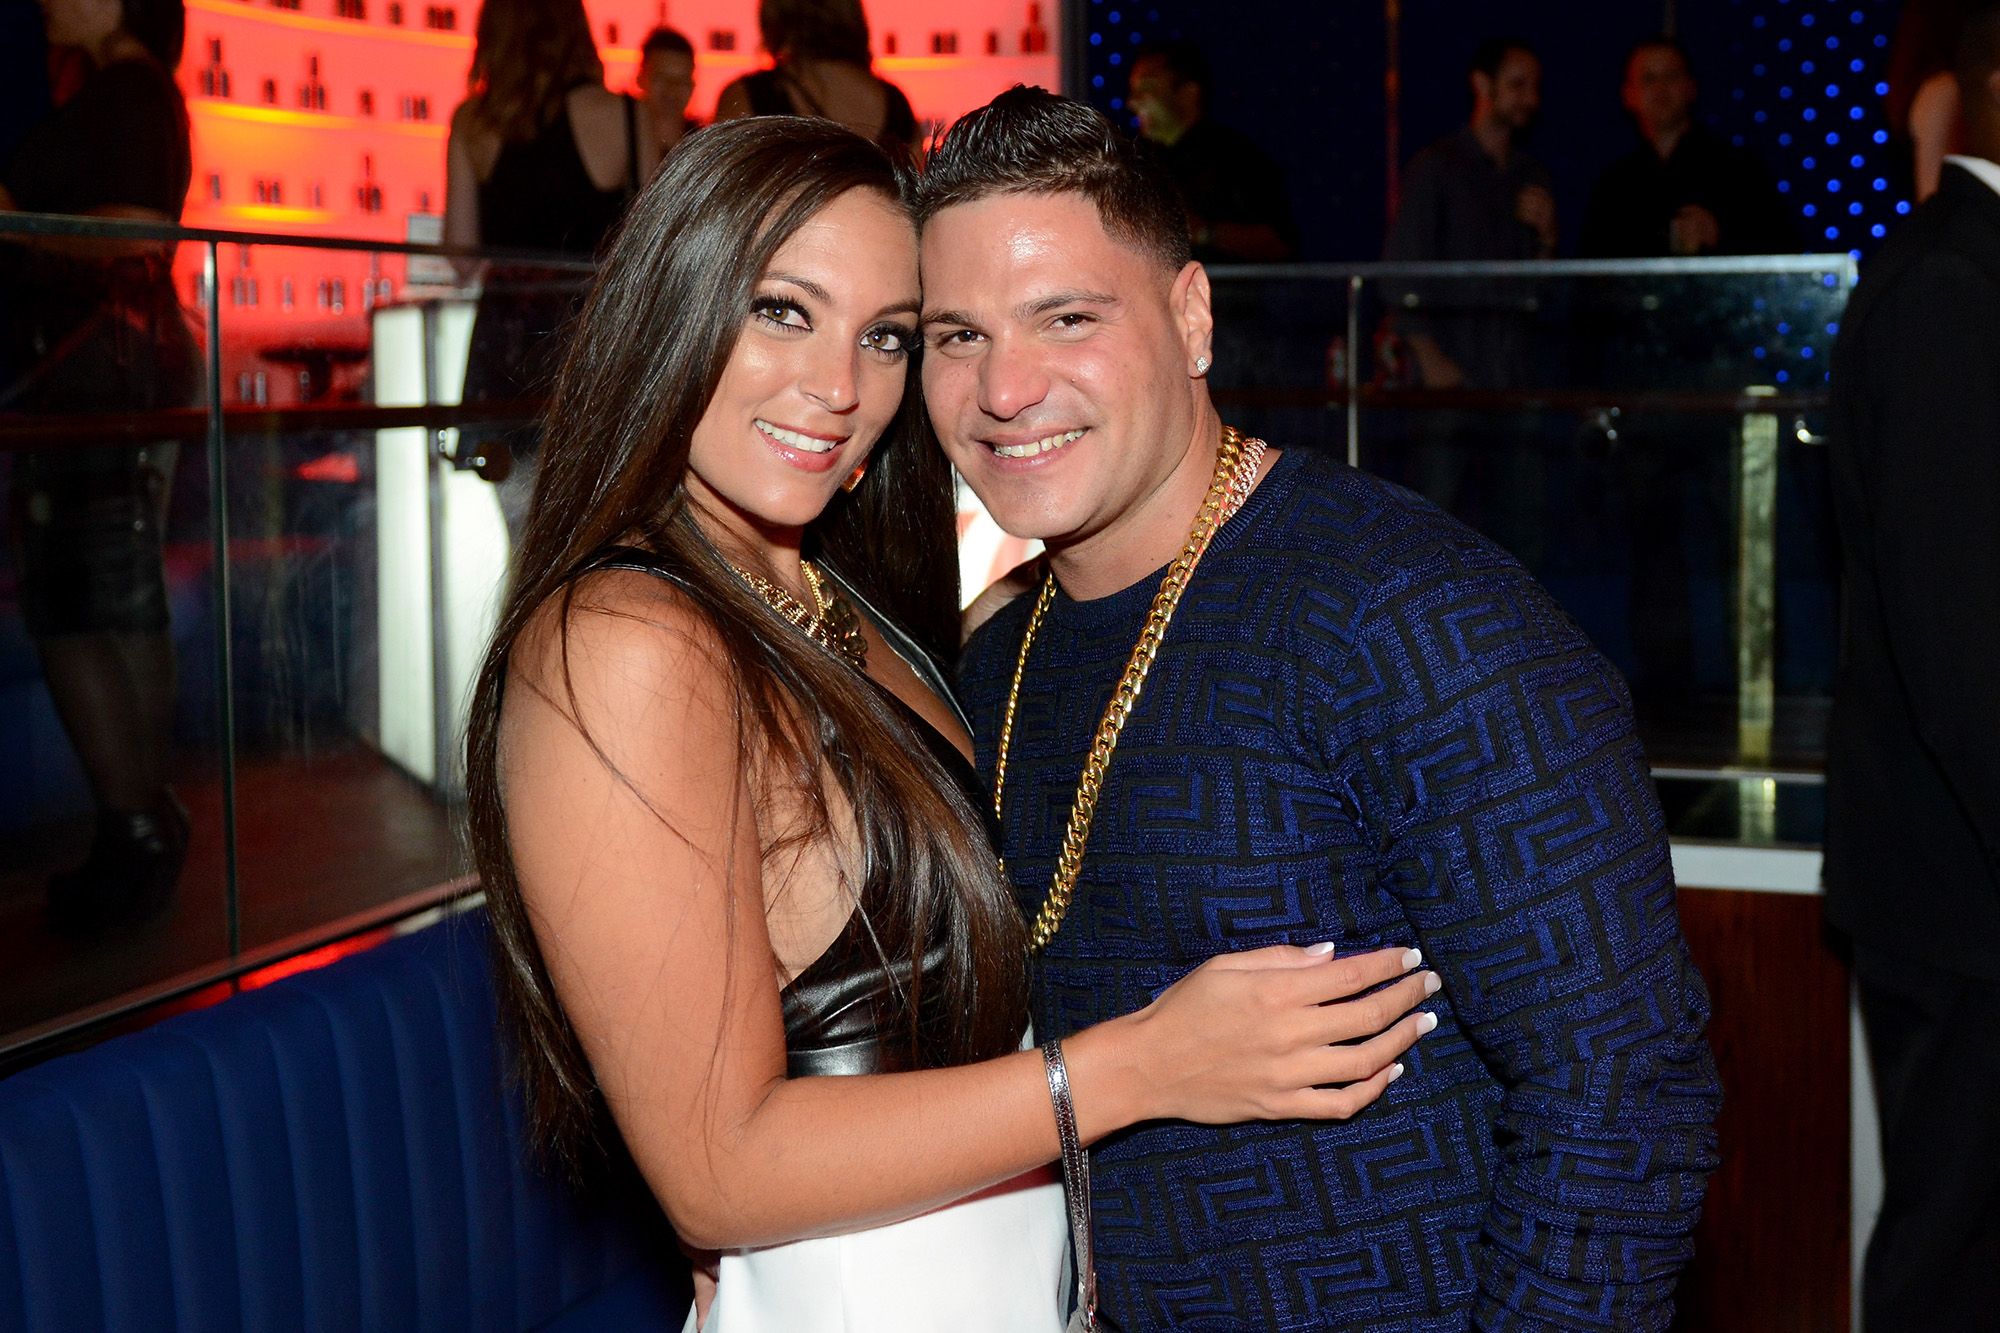 'Jersey Shore' Star Ronnie Speaks Out About Cheating On Sammi